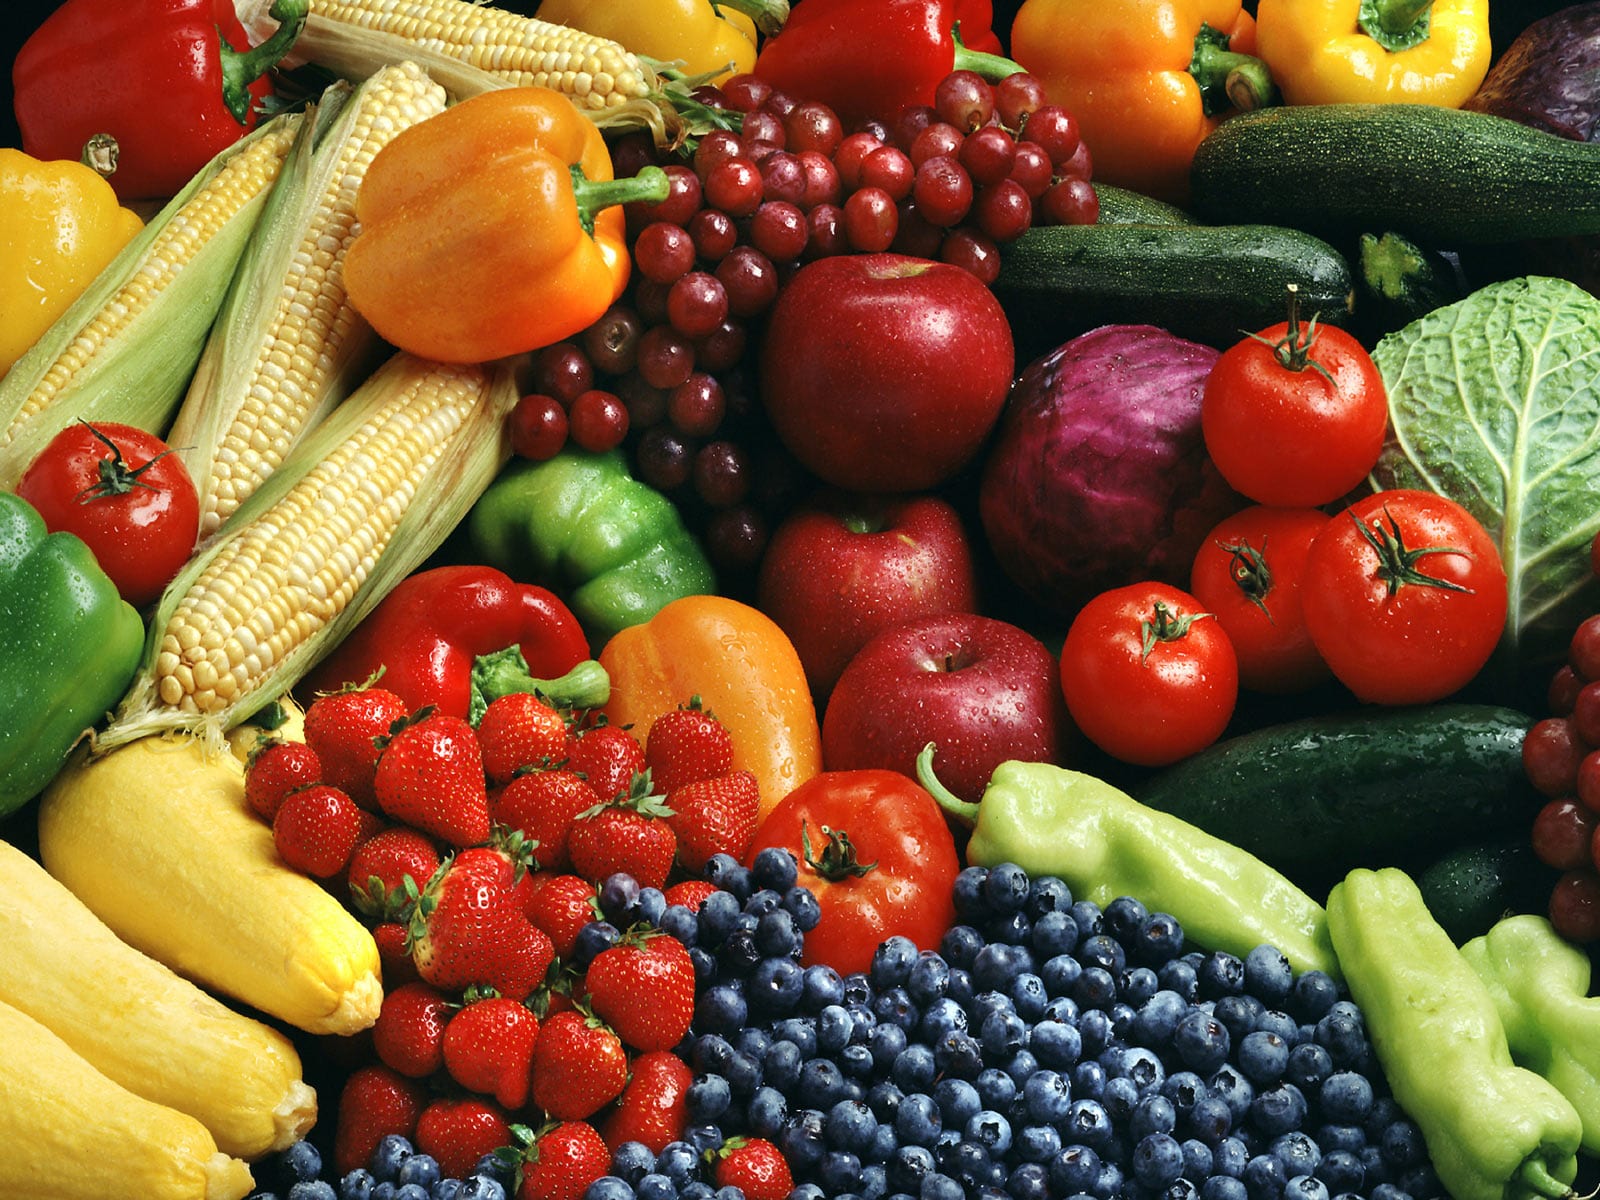 Pick a diet with lots of fruits and vegetables